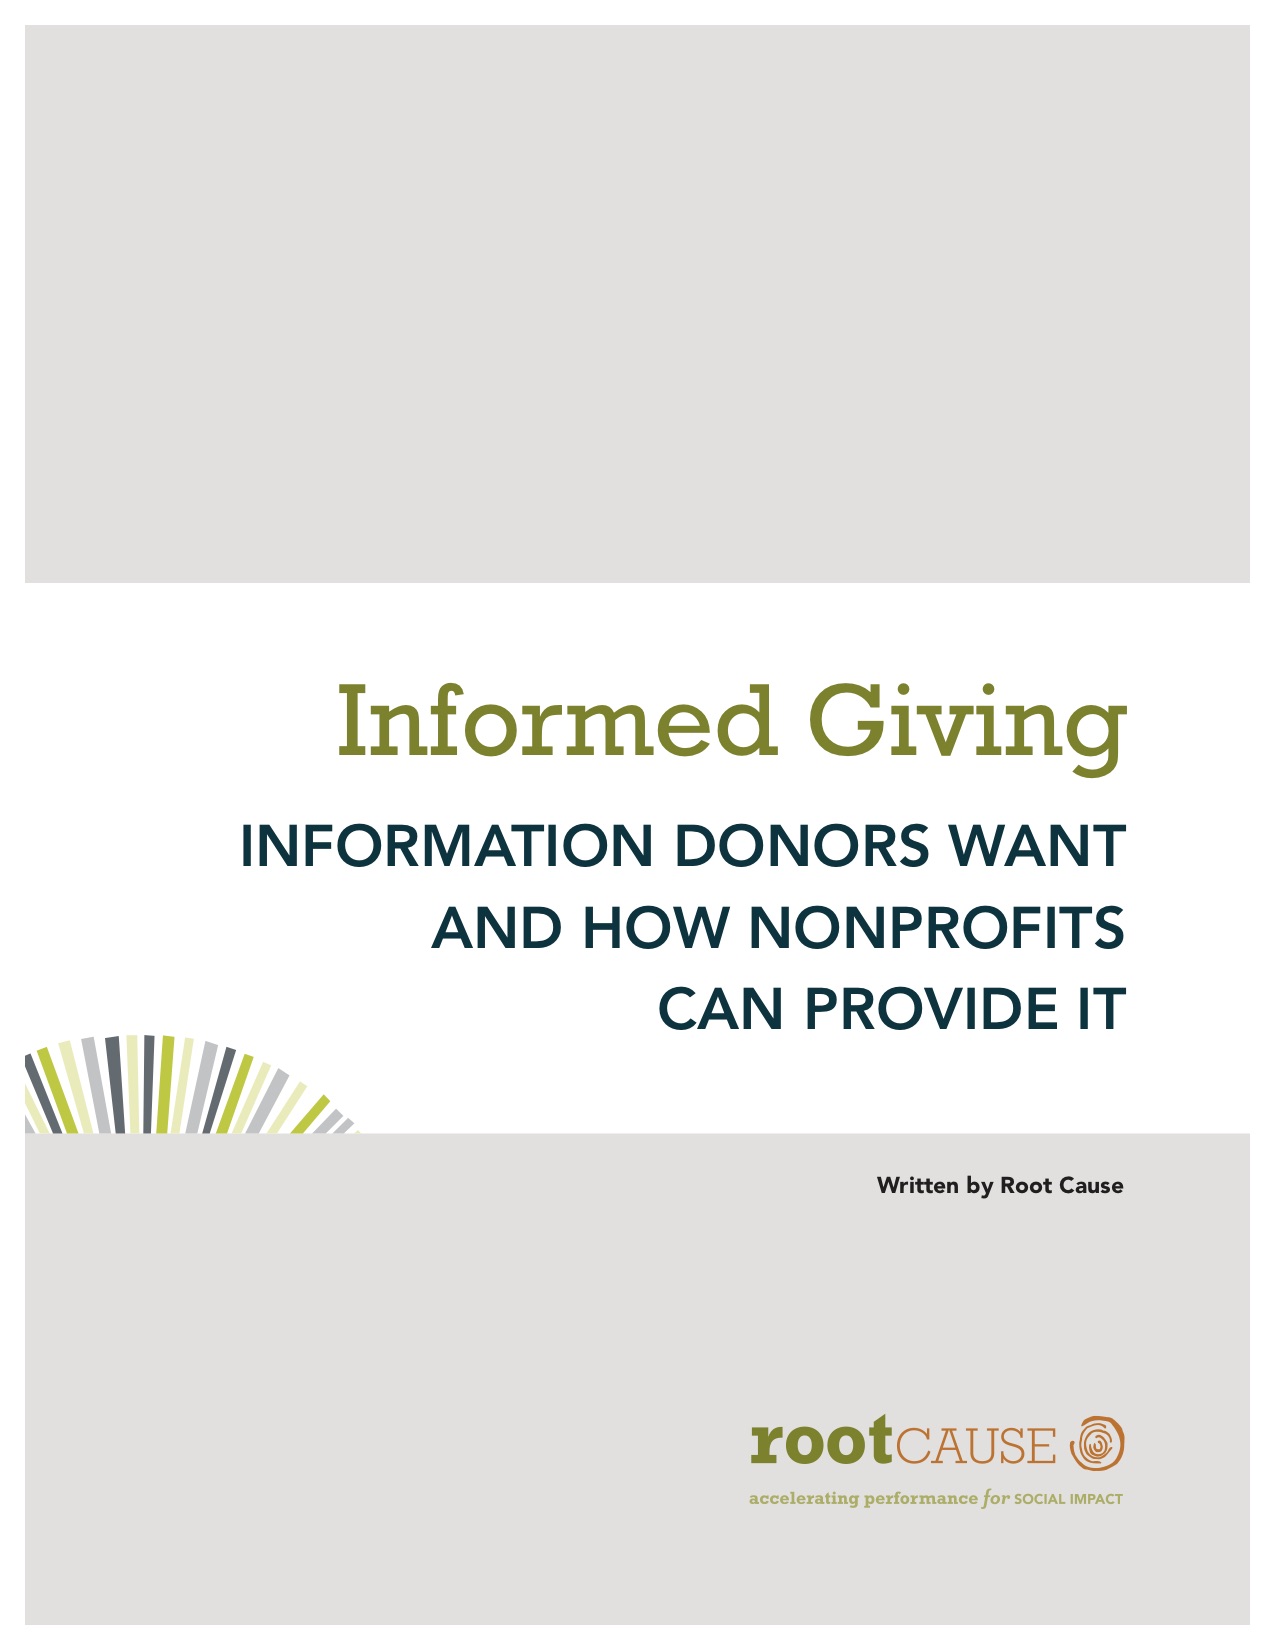 Informed Giving: Information Donors Want and How Nonprofits Can Provide It